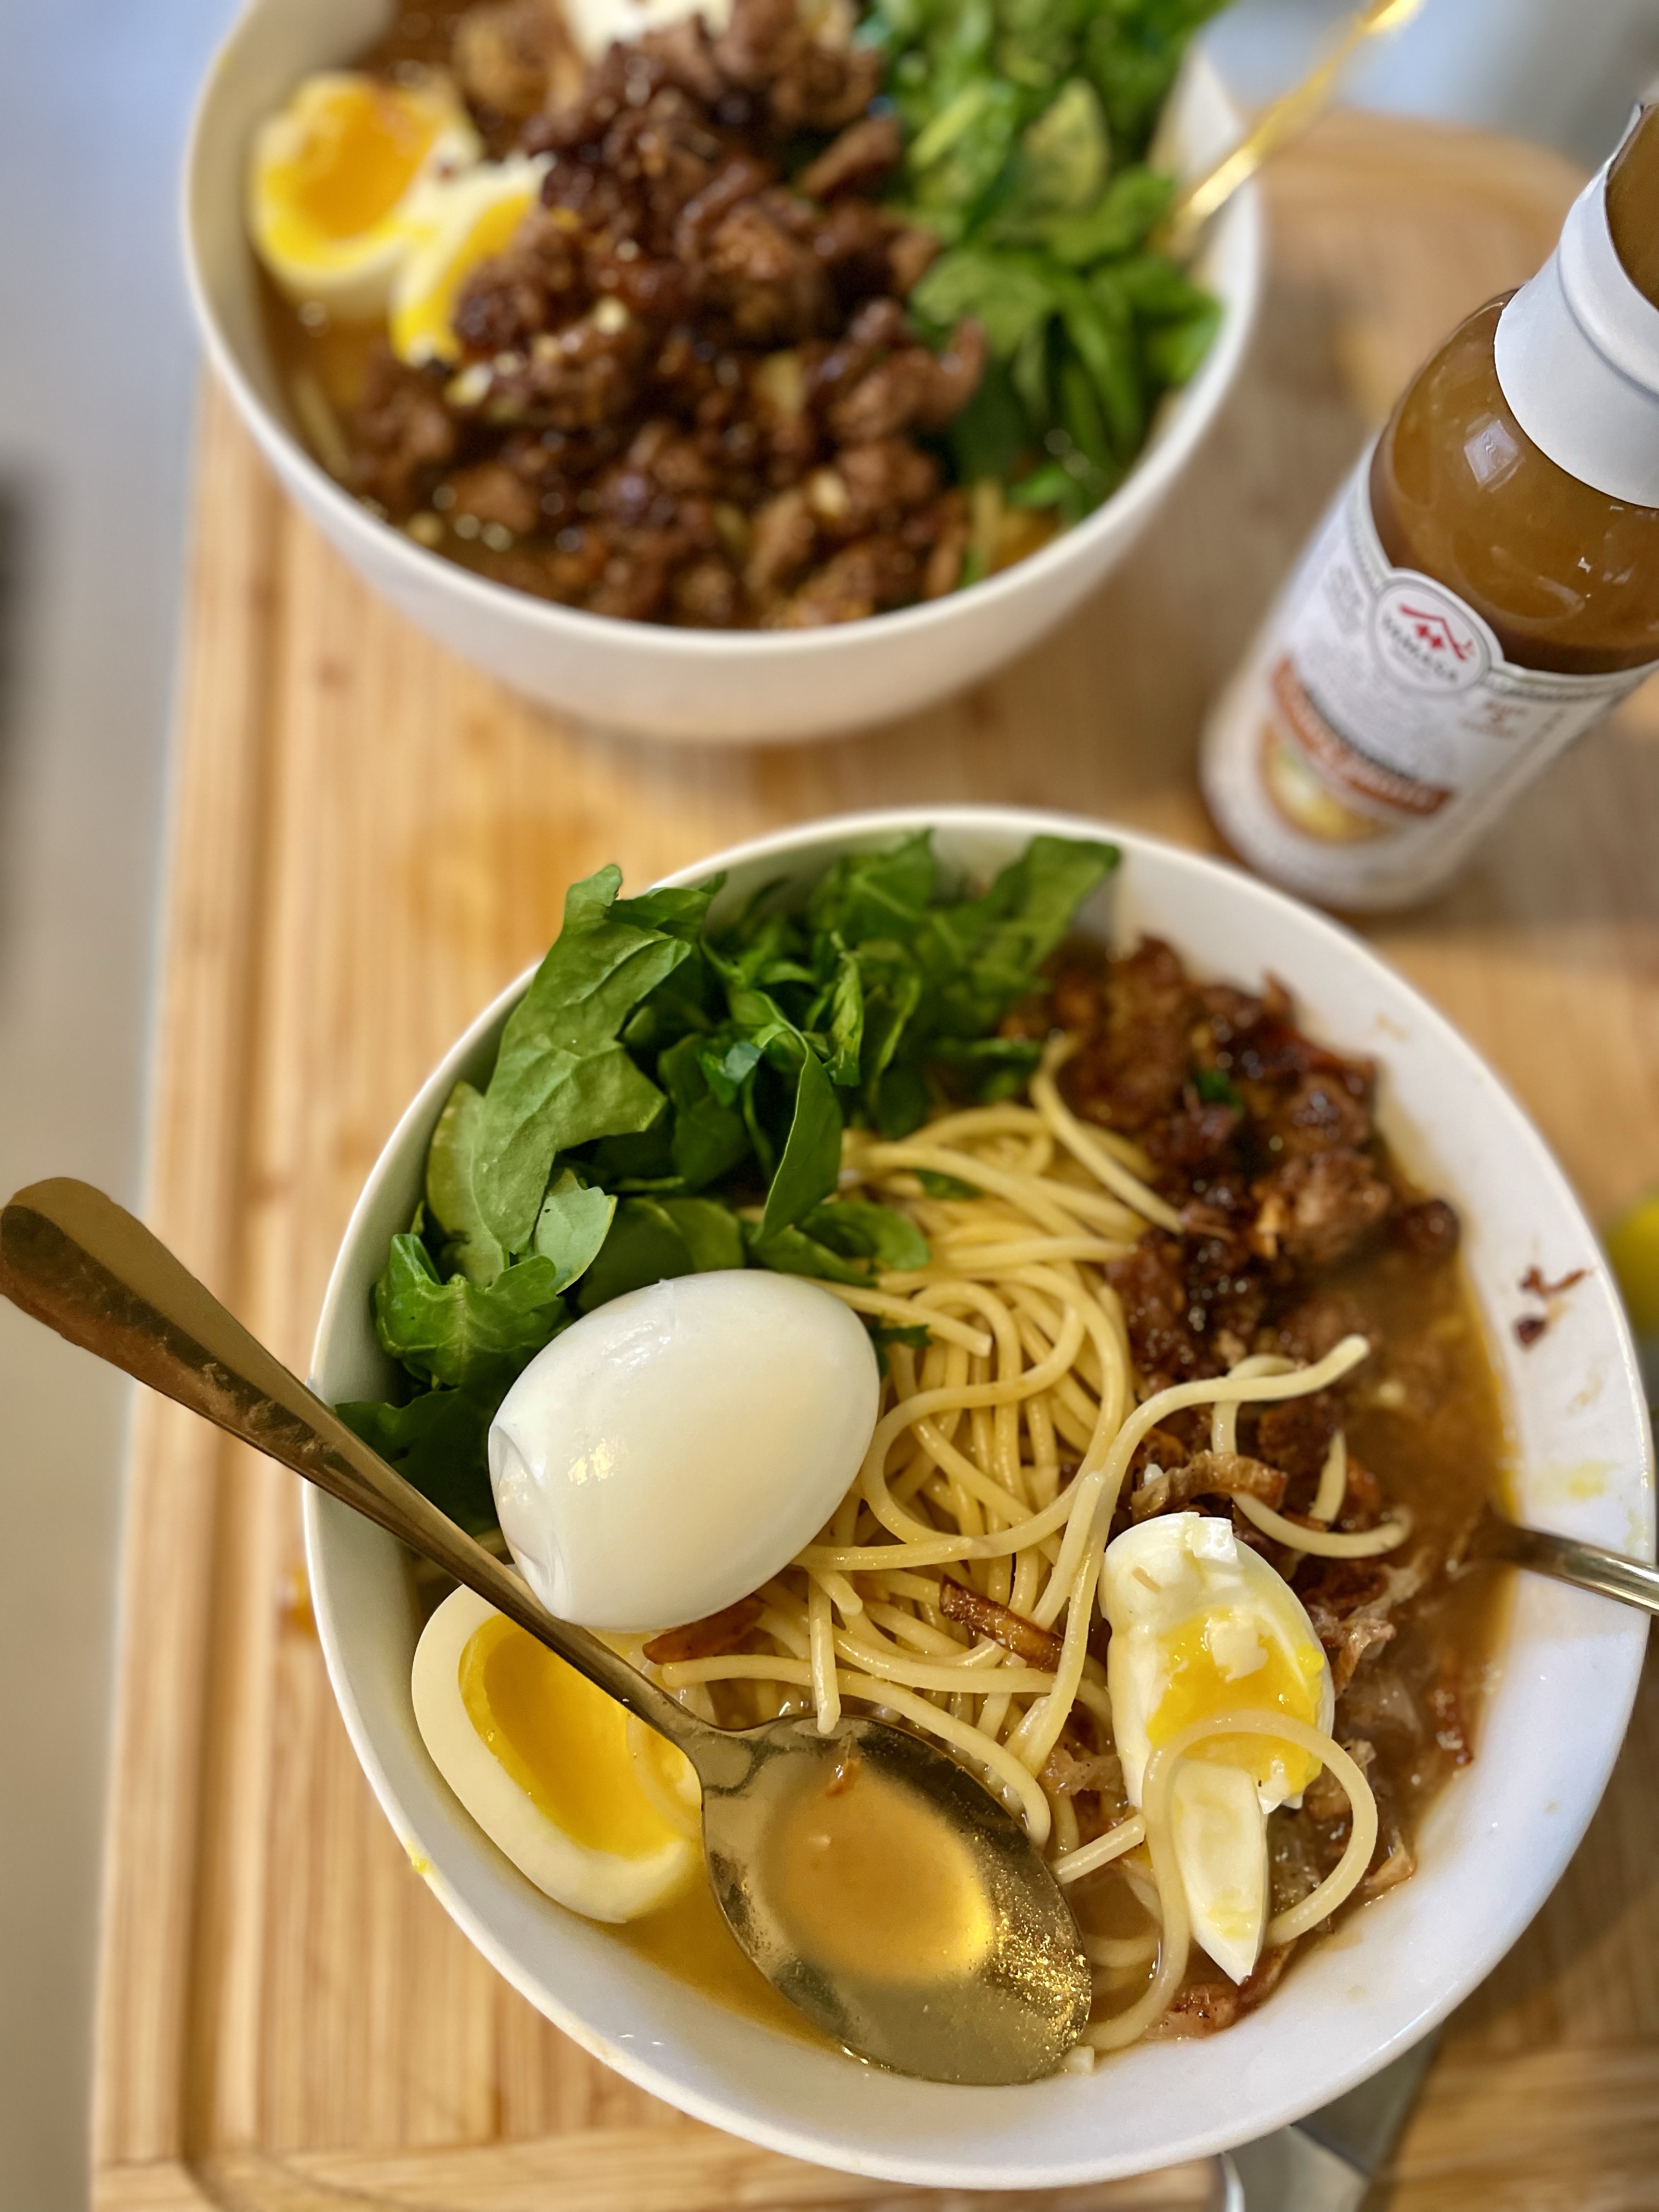 Try this easy Miso Ramen Soup, Recipe Here!